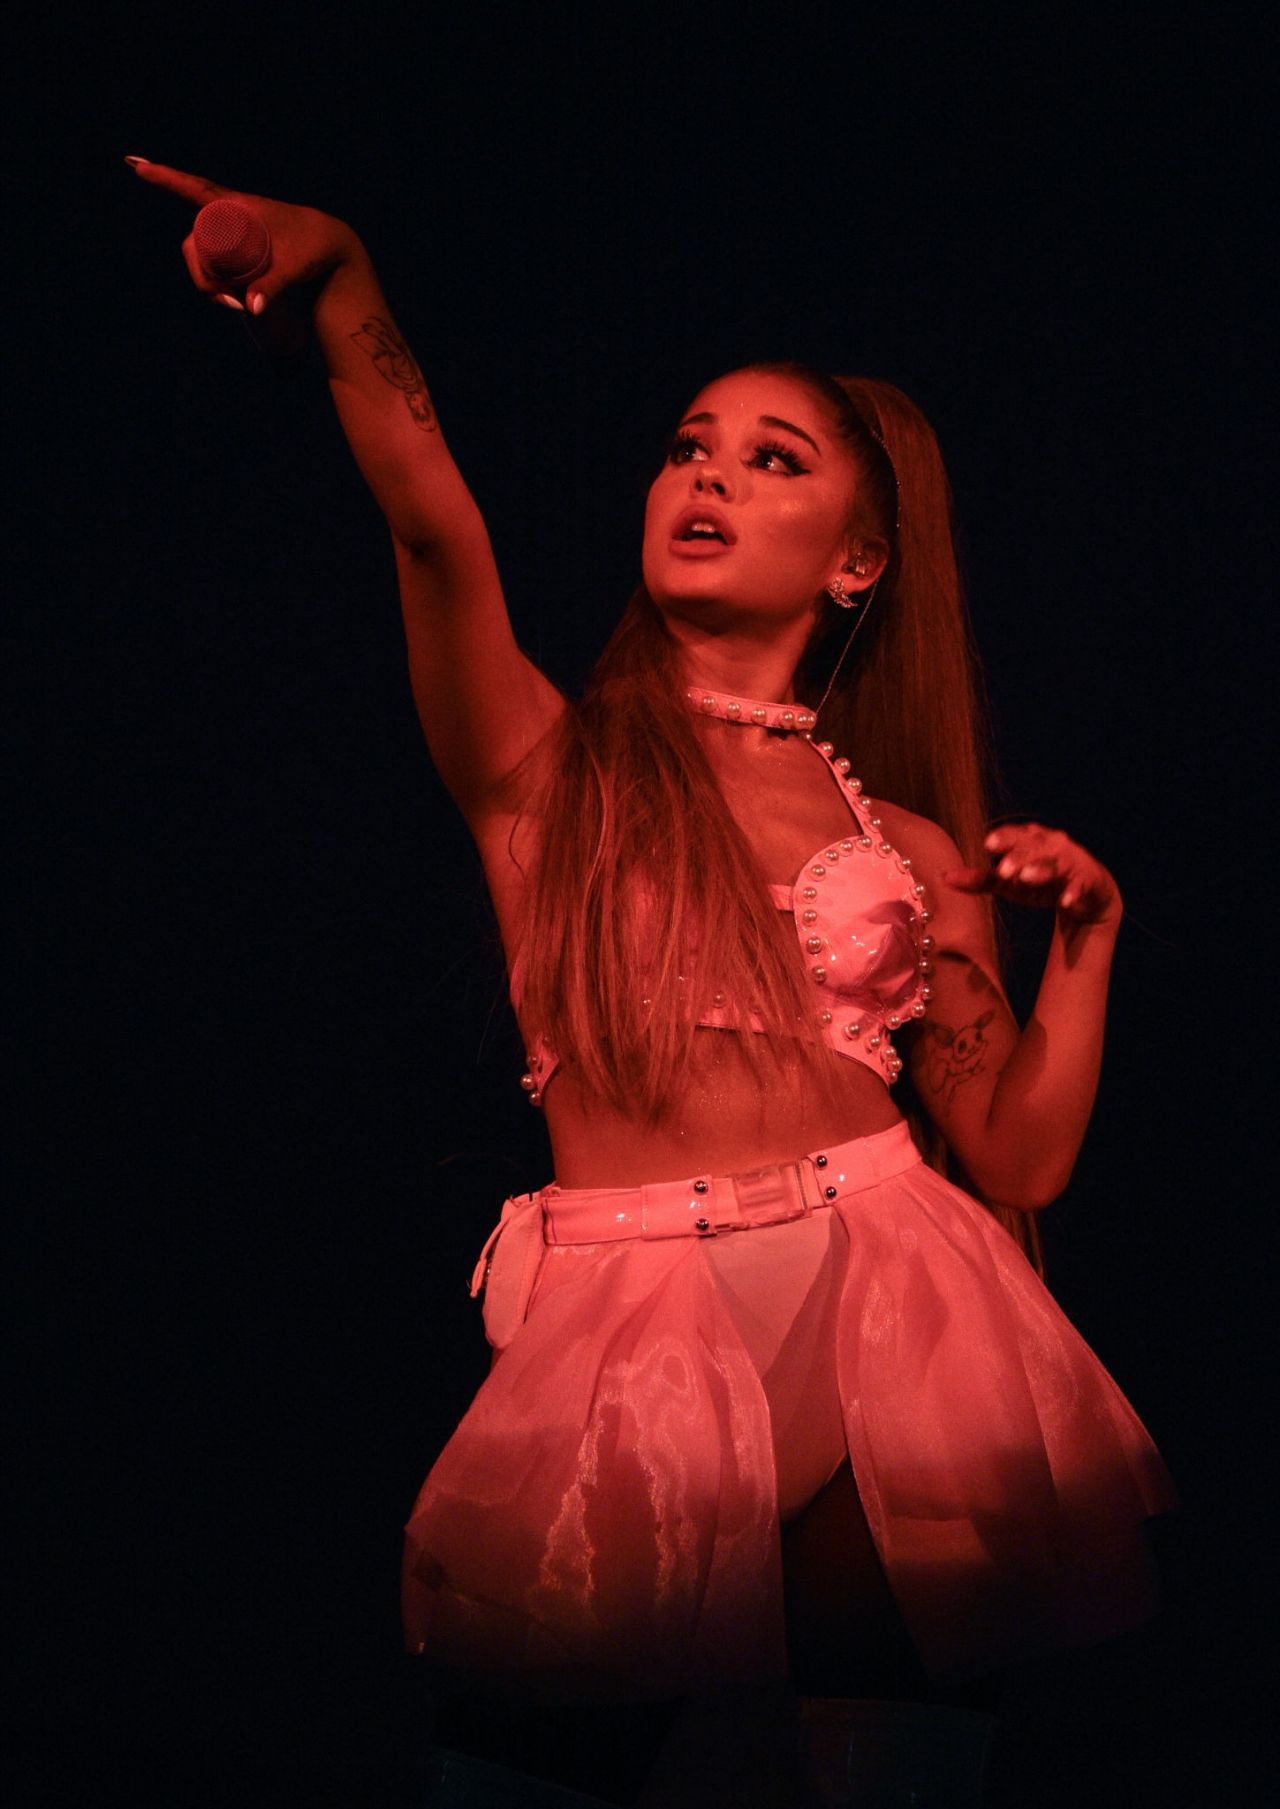 Ariana Grande Performs Live at the "Sweetener World Tour" in London